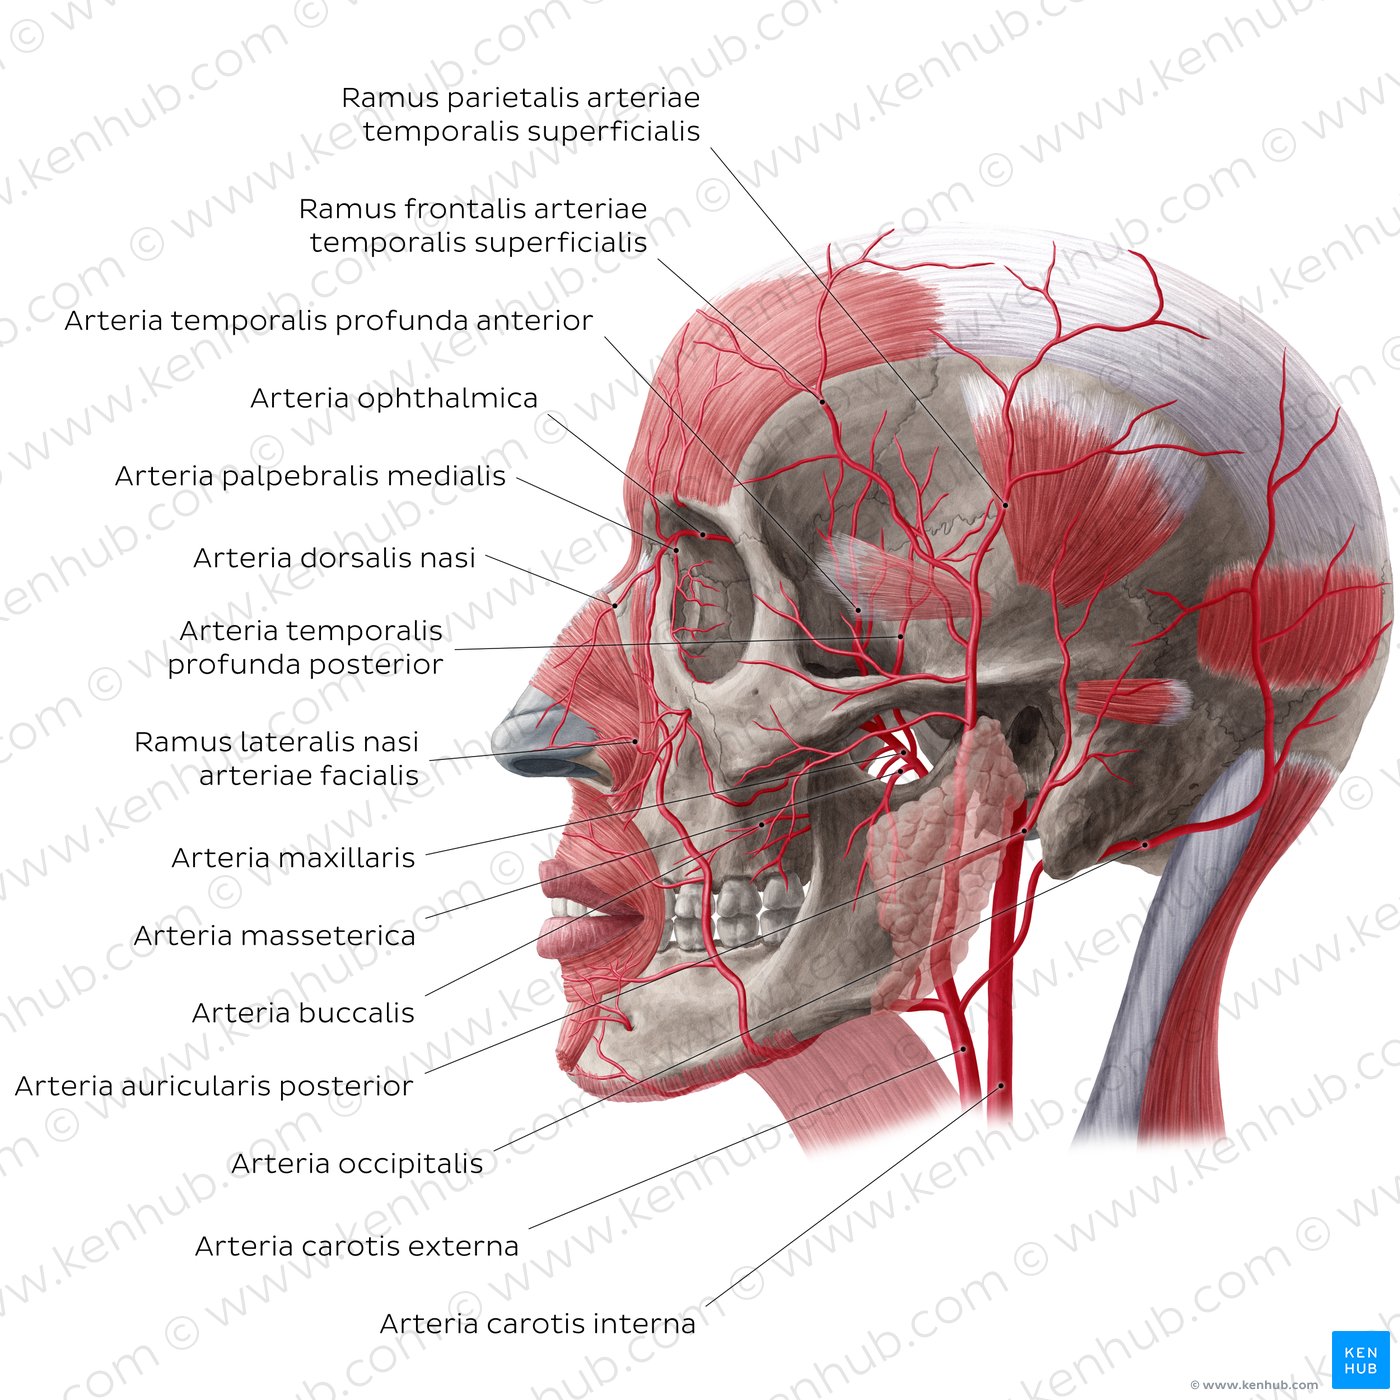 Arteries of face and scalp (Lateral view)